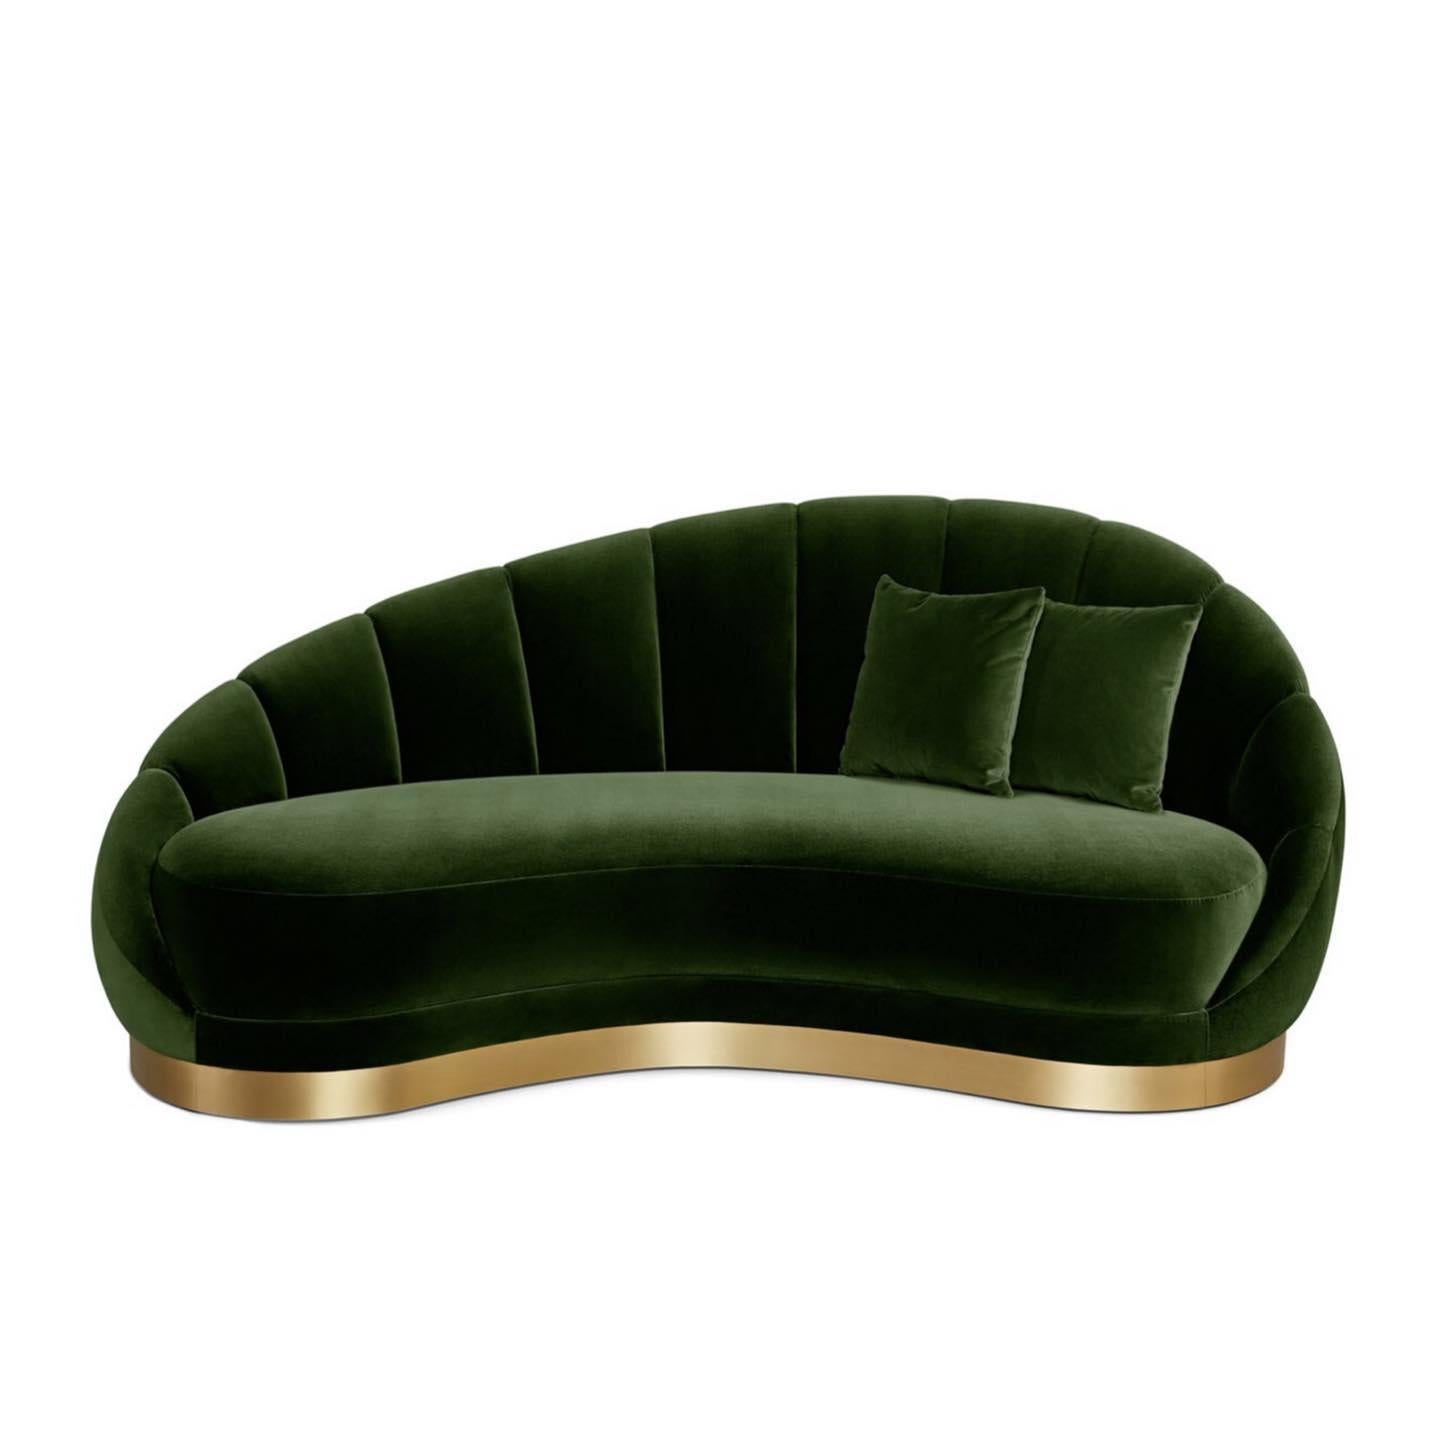 This chaise longue is a pure haute couture, with its sensuous feminine outline and voluptuous shape. Each exquisite curve features detailed seaming through the front to back, enveloped by a sinuous footer, creating the piece de resistance for any